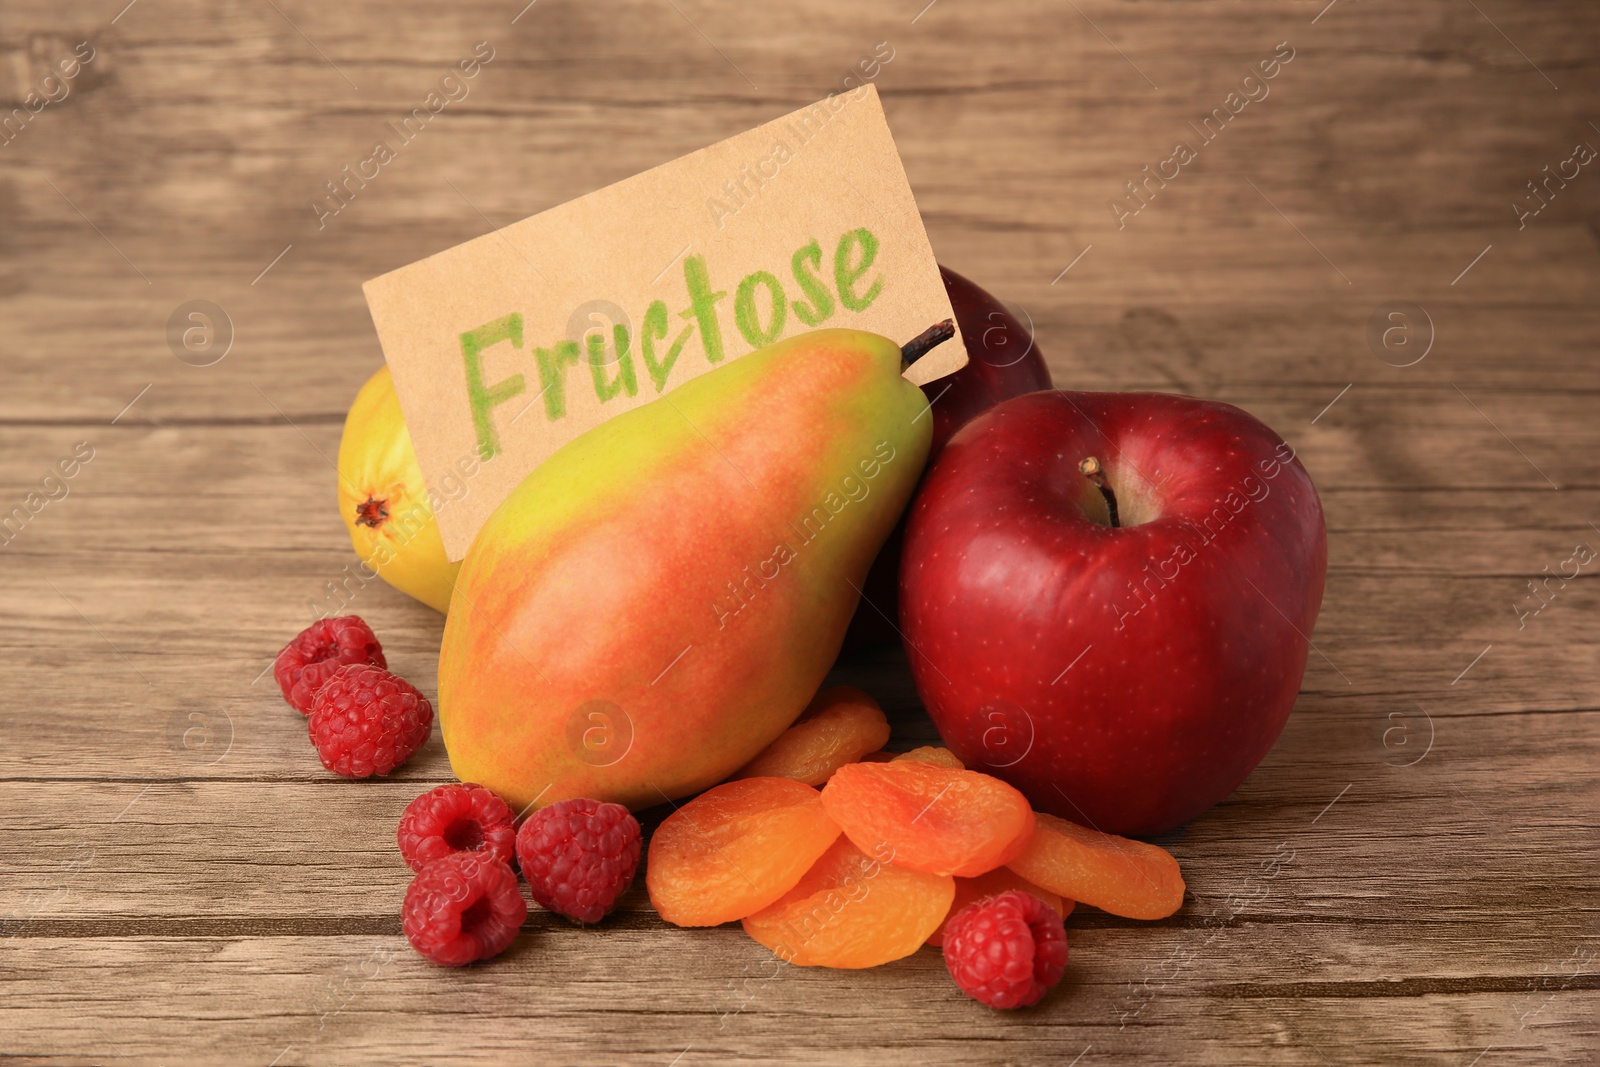 Photo of Card with word Fructose, delicious ripe fruits, raspberries and dried apricots on wooden table